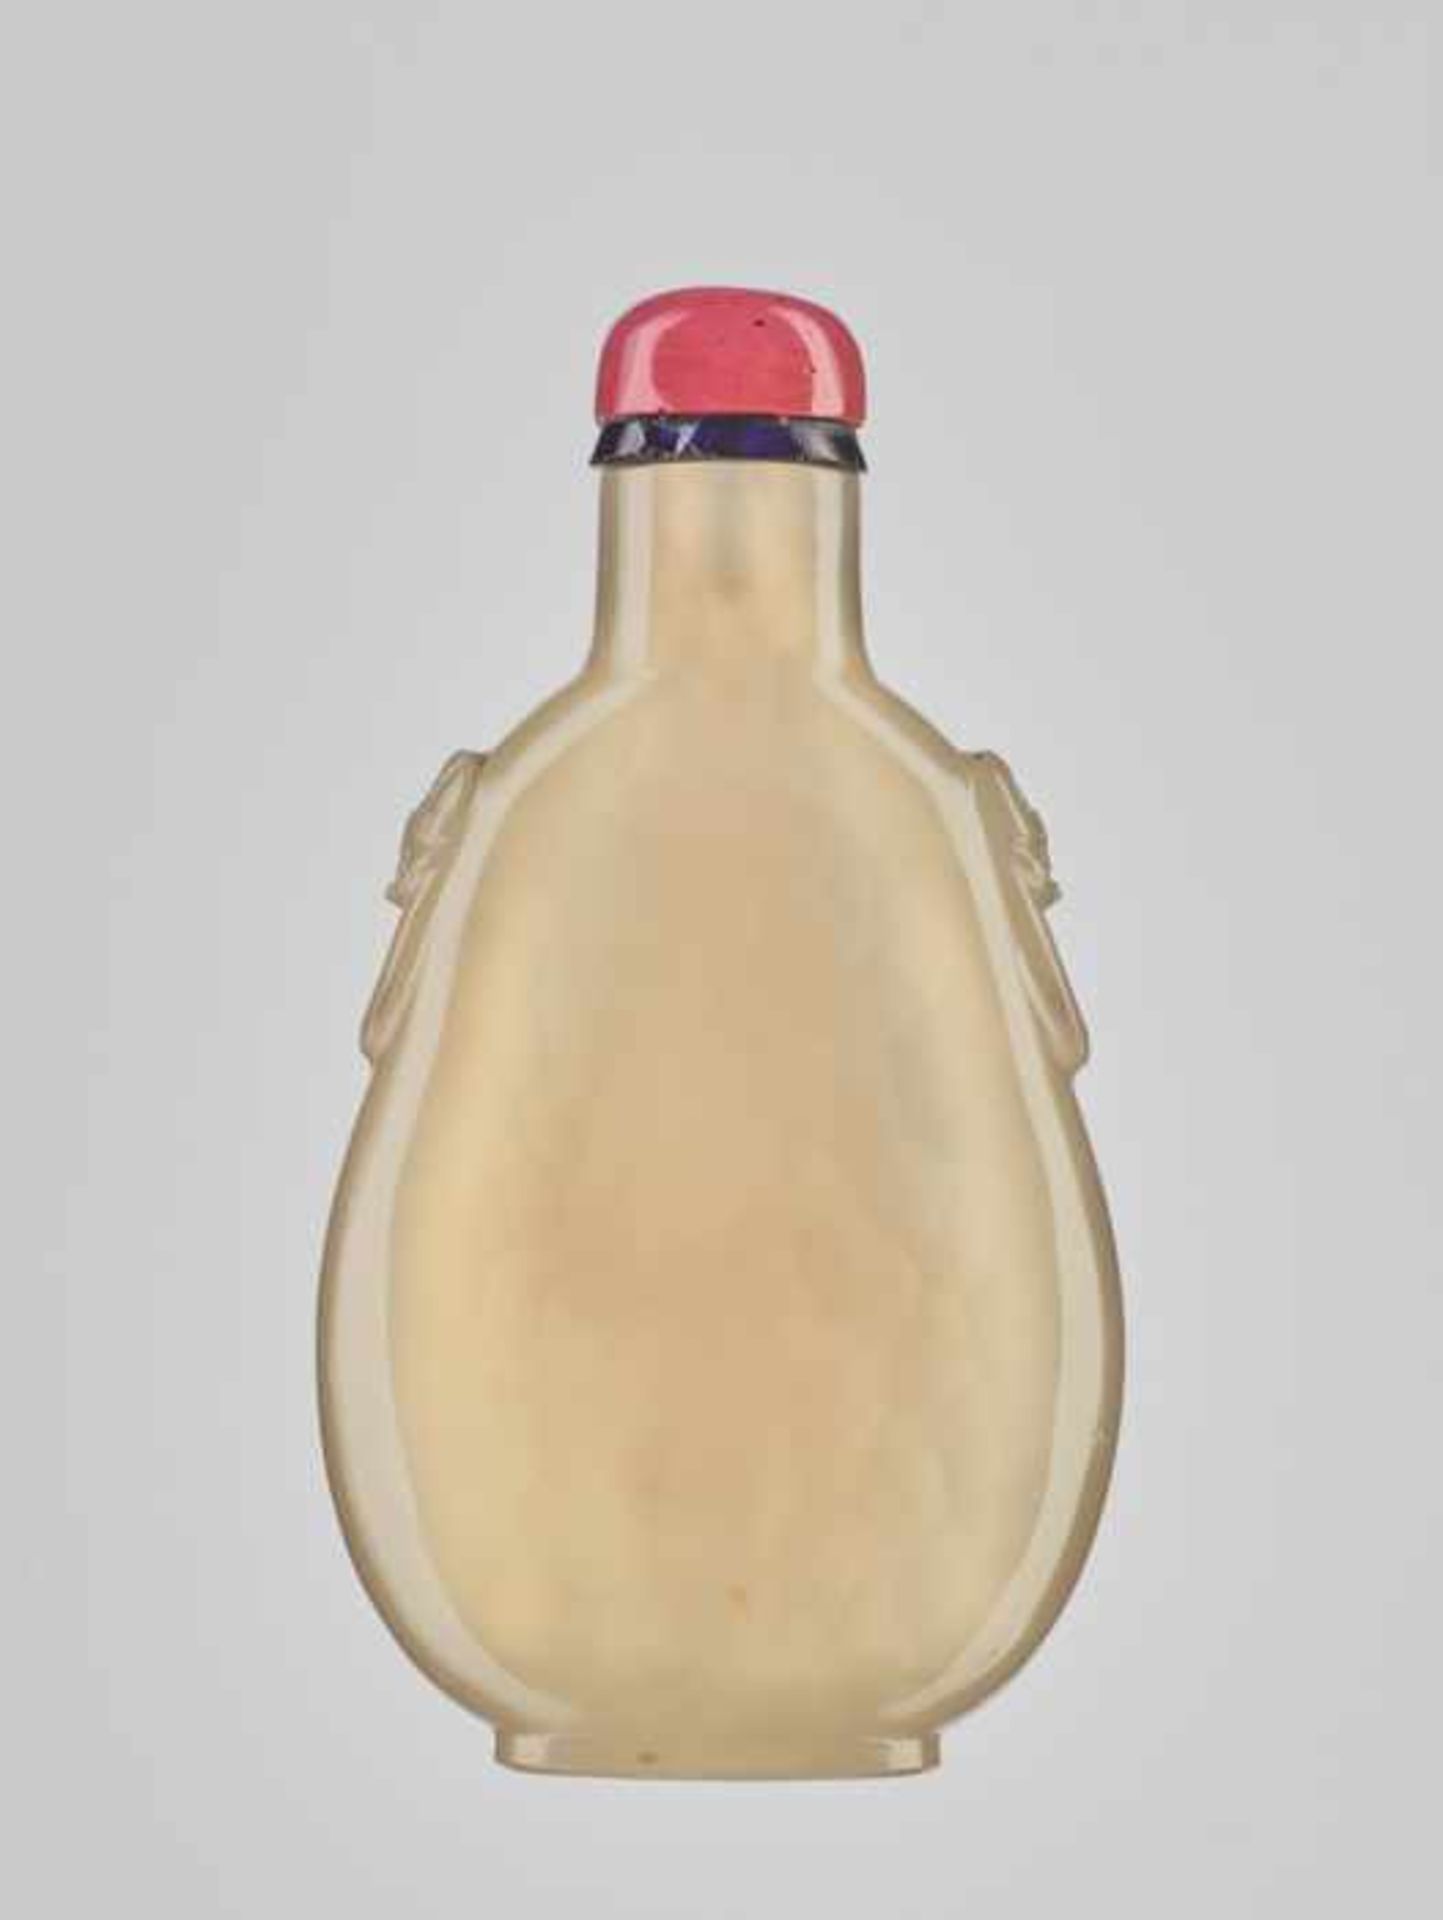 A PEAR SHAPED DENDRITIC CHALCEDONY SNUFF BOTTLE, 1750-1850 The chalcedony of even, almost flawless